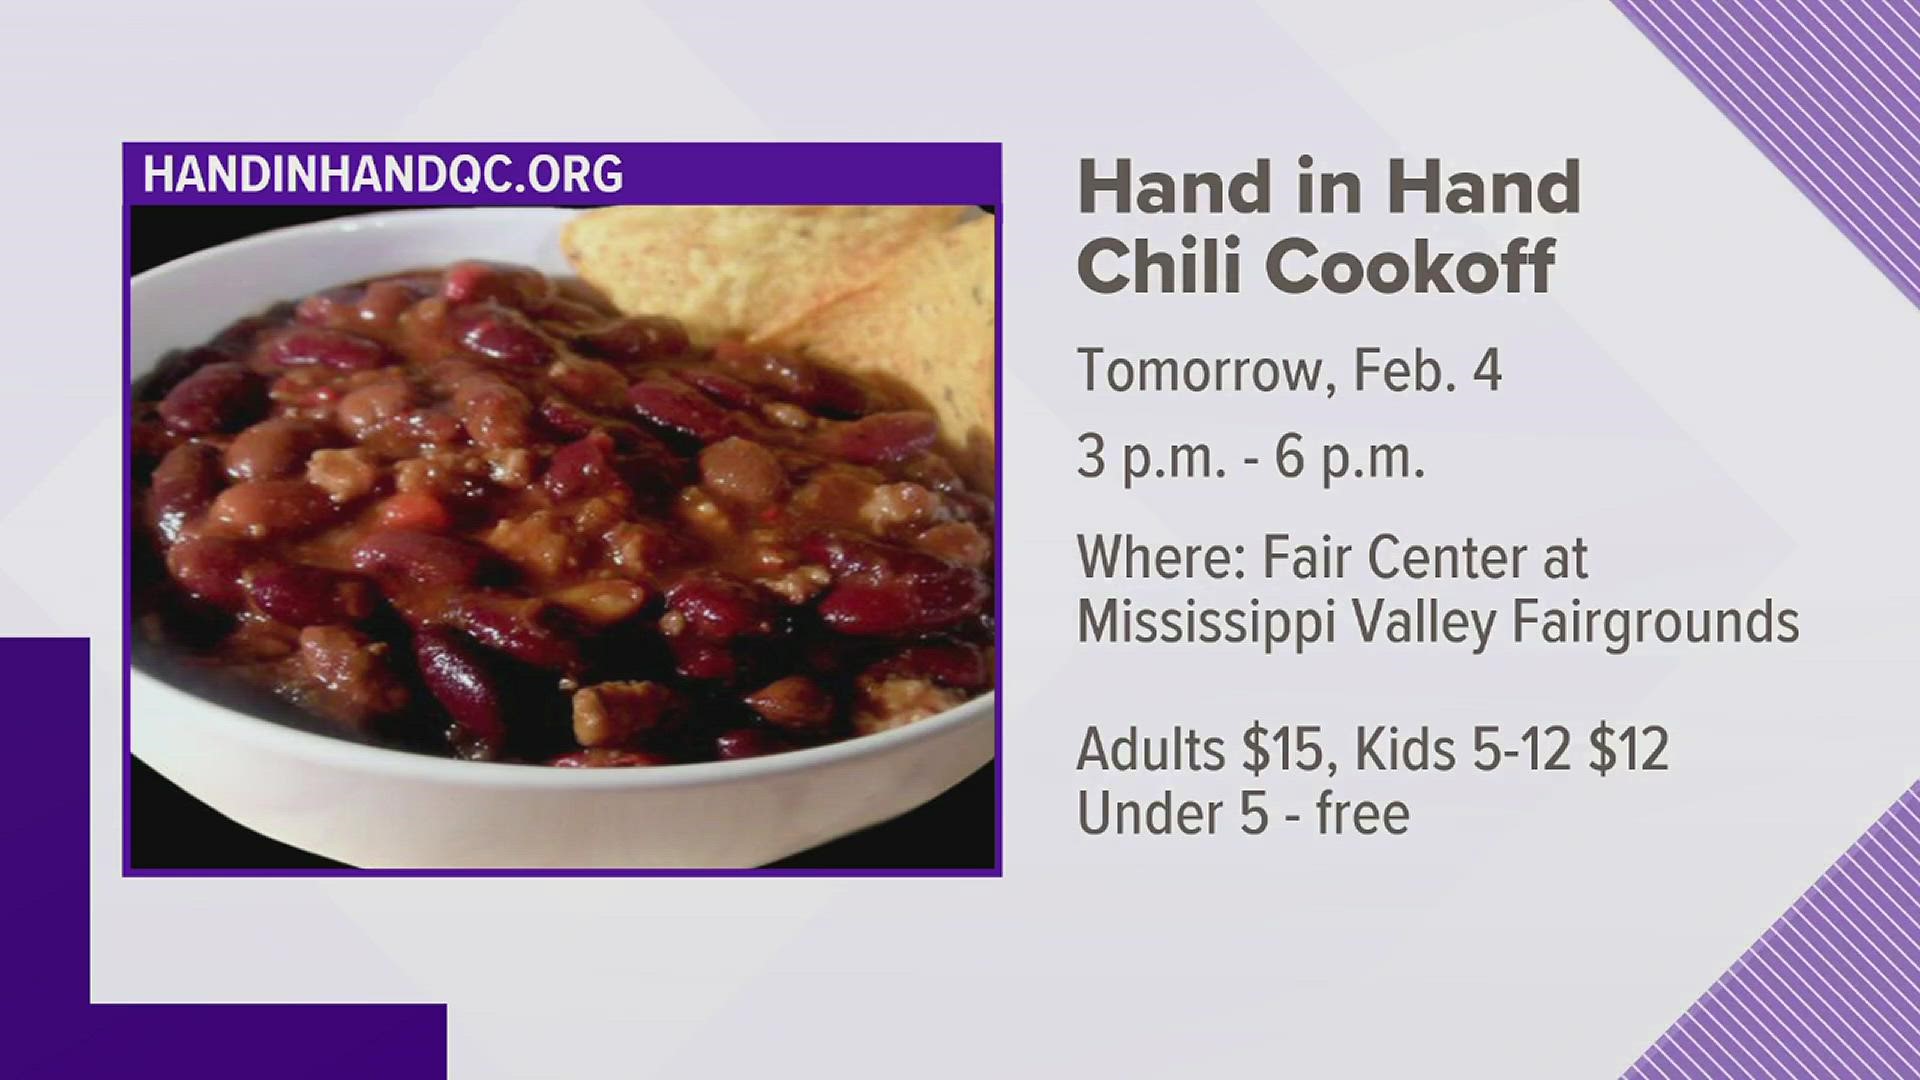 The annual cook-off will feature 17 different chili recipes from 17 QC restaurants and organizations competing to be the best and fundraising.